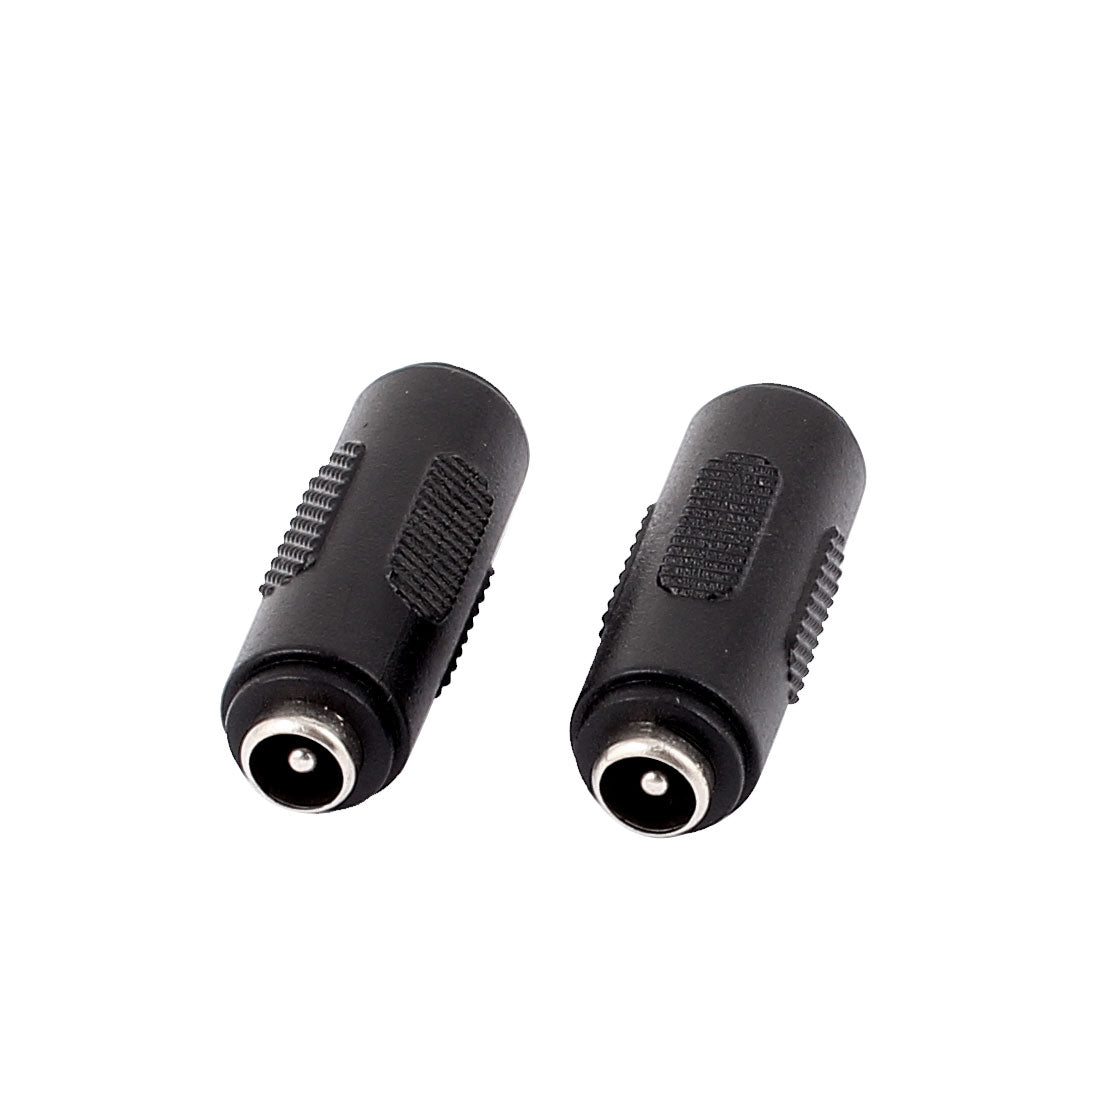 Uxcell Uxcell 2Pcs DC Power Female to Female Jack Adapter 2.1x5.5mm Connector For CCTV Camera